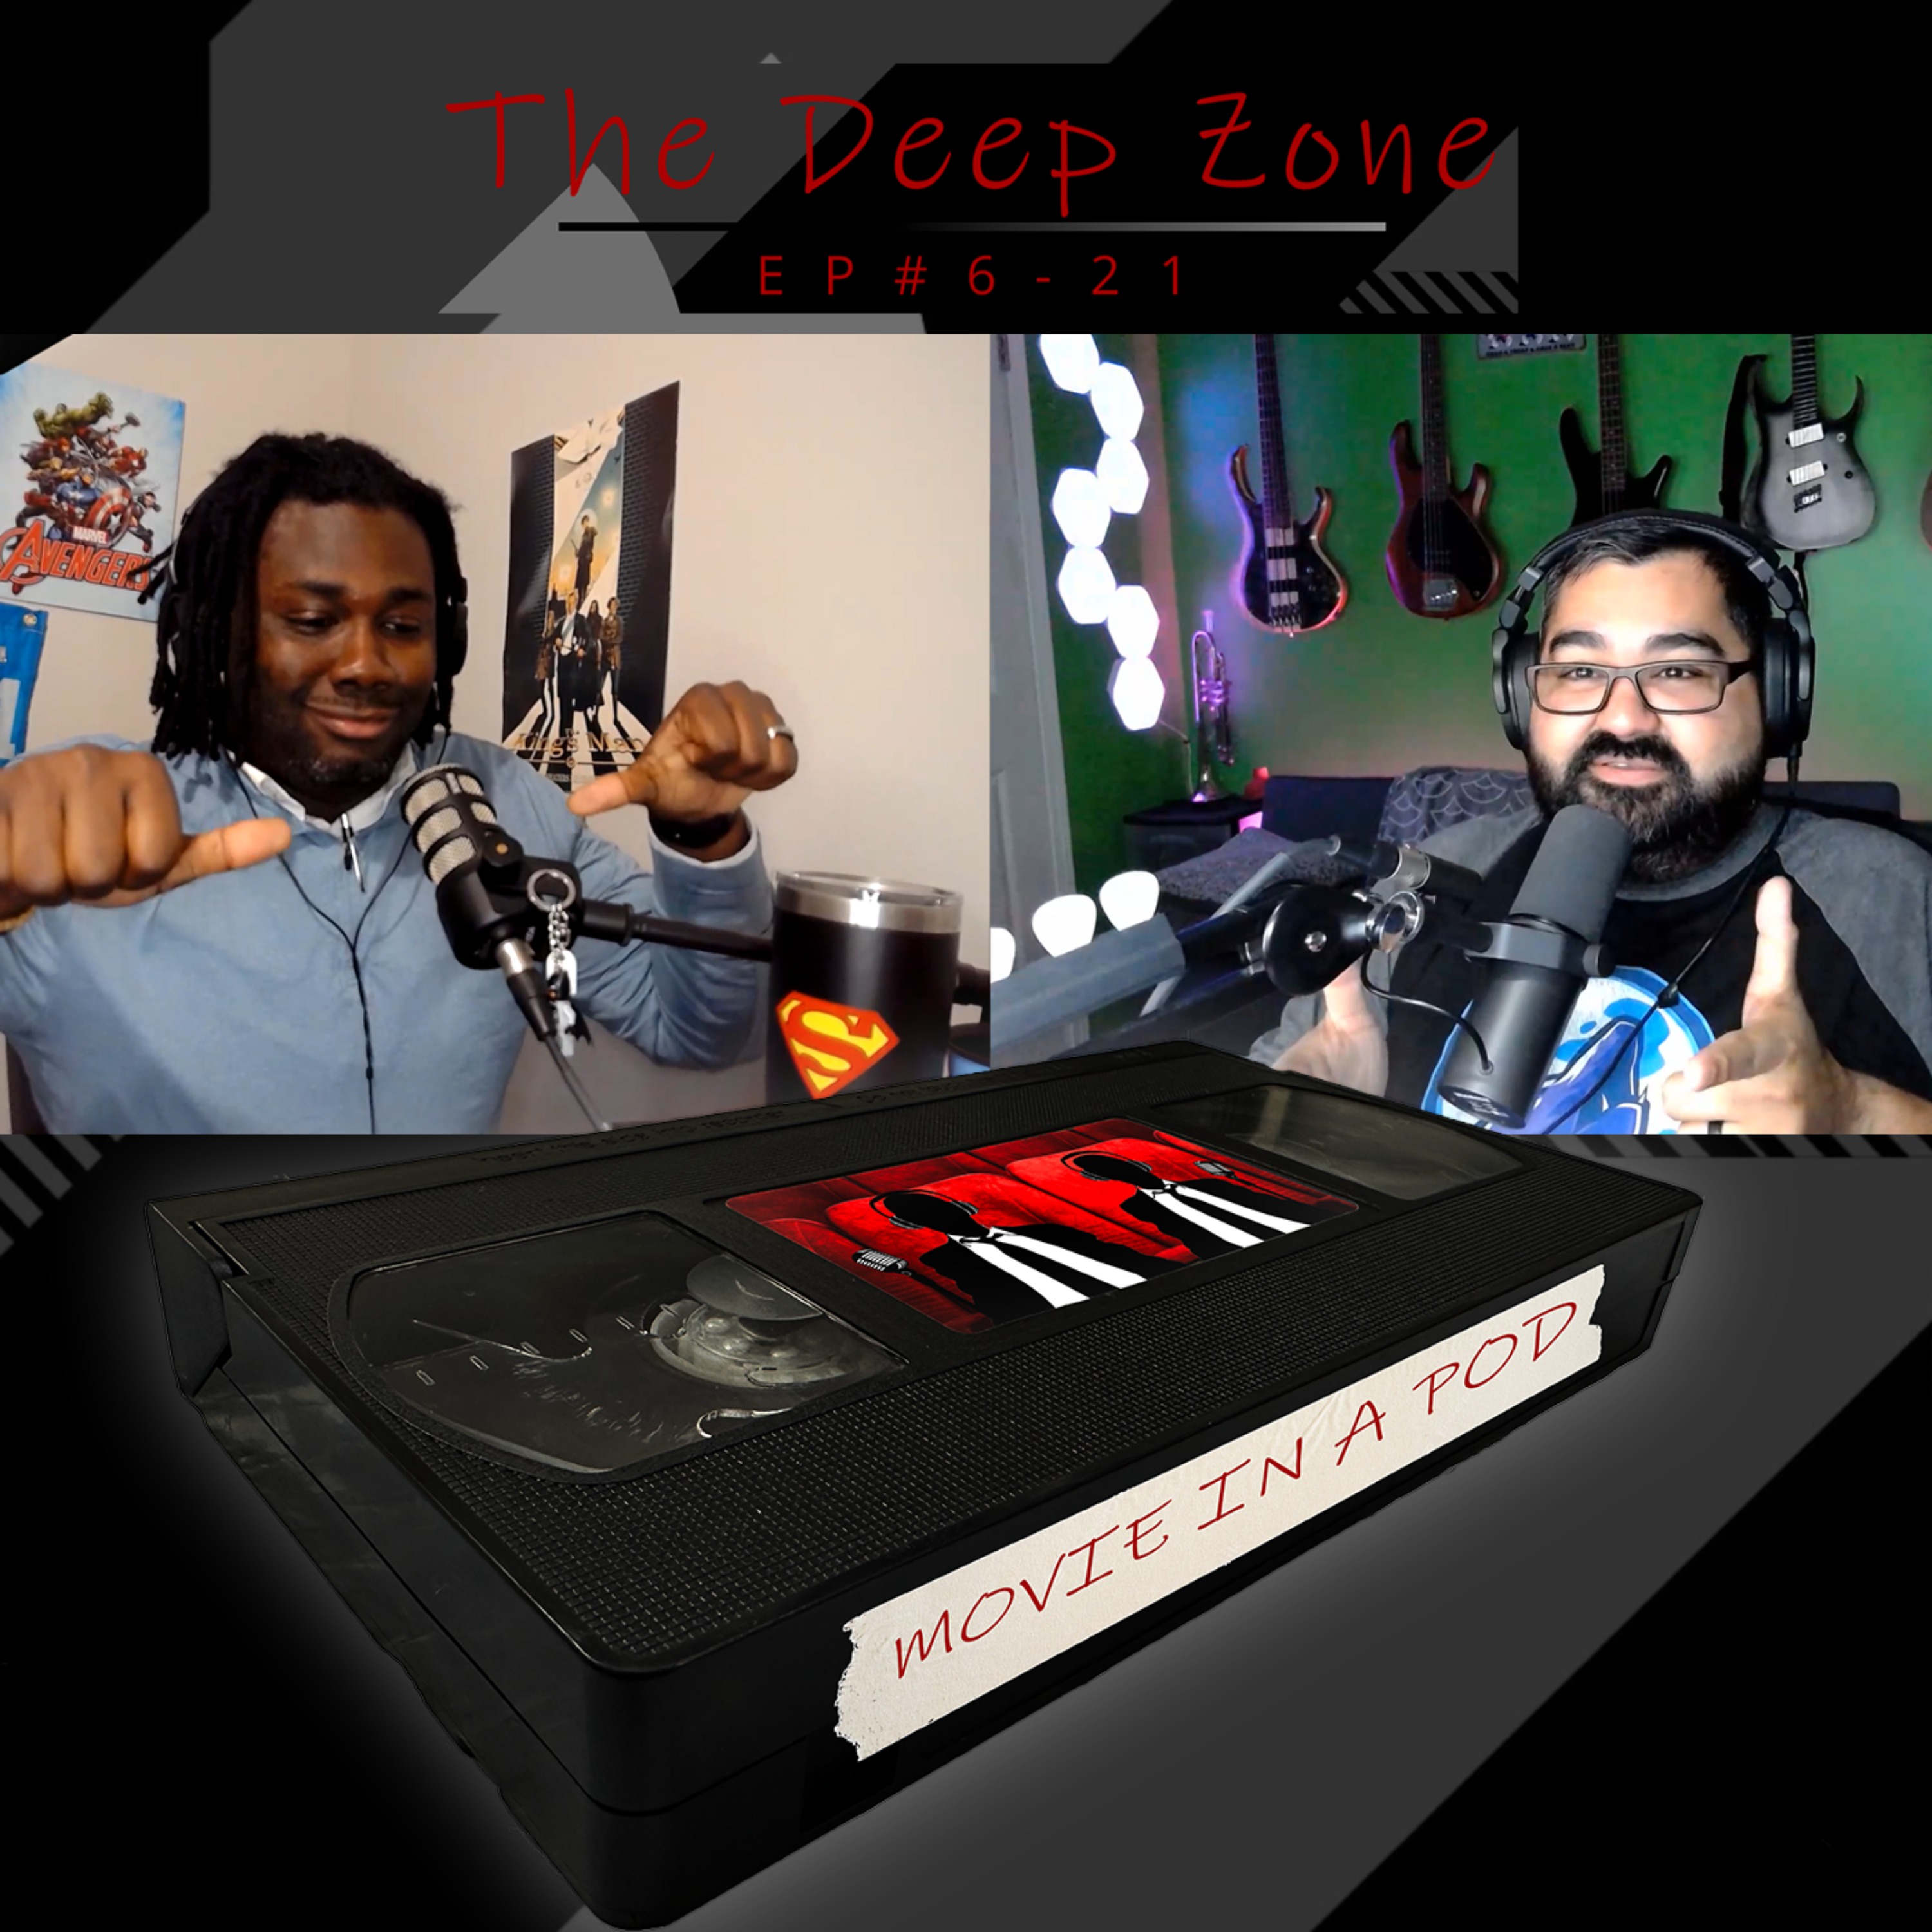 EP#6-21 The Deep Zone